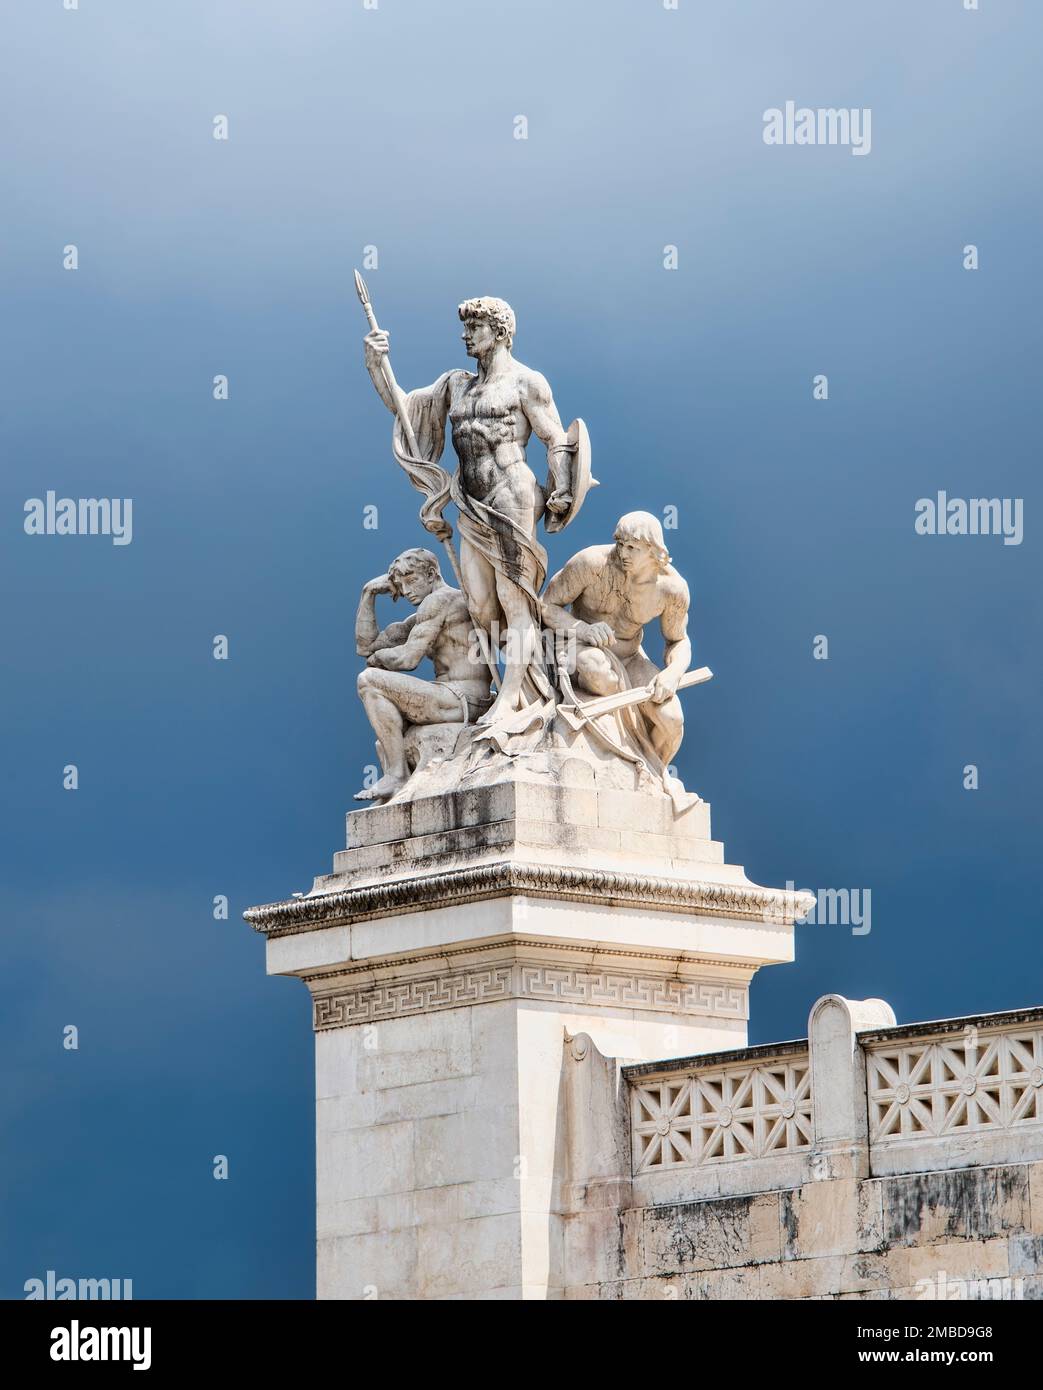 Part of the impressive artwork at The Victor Emmanuel II National Monument or Vittoriano, or the Altar of the Fatherland in  Rome, Italy Stock Photo